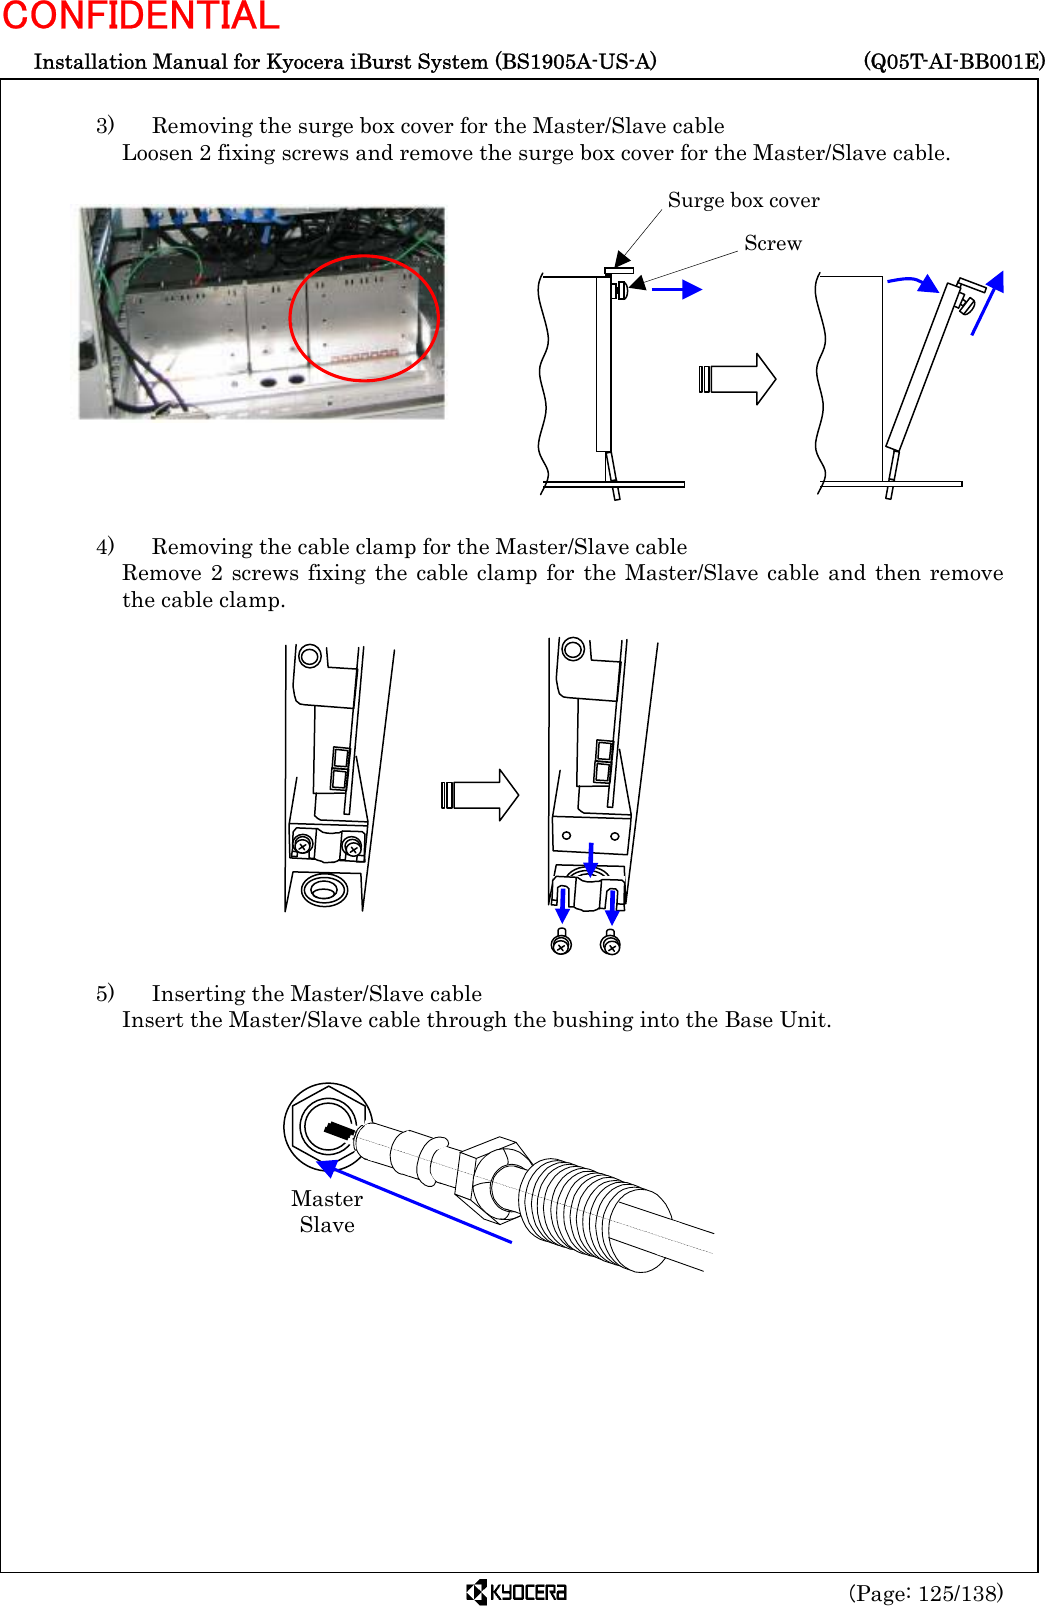  Installation Manual for Kyocera iBurst System (BS1905A-US-A)     (Q05T-AI-BB001E) (Page: 125/138) CONFIDENTIAL  3)    Removing the surge box cover for the Master/Slave cable Loosen 2 fixing screws and remove the surge box cover for the Master/Slave cable.               4)    Removing the cable clamp for the Master/Slave cable Remove 2 screws fixing the cable clamp for the Master/Slave cable and then remove the cable clamp.               5)    Inserting the Master/Slave cable Insert the Master/Slave cable through the bushing into the Base Unit.                     Master Slave Surge box cover  Screw 